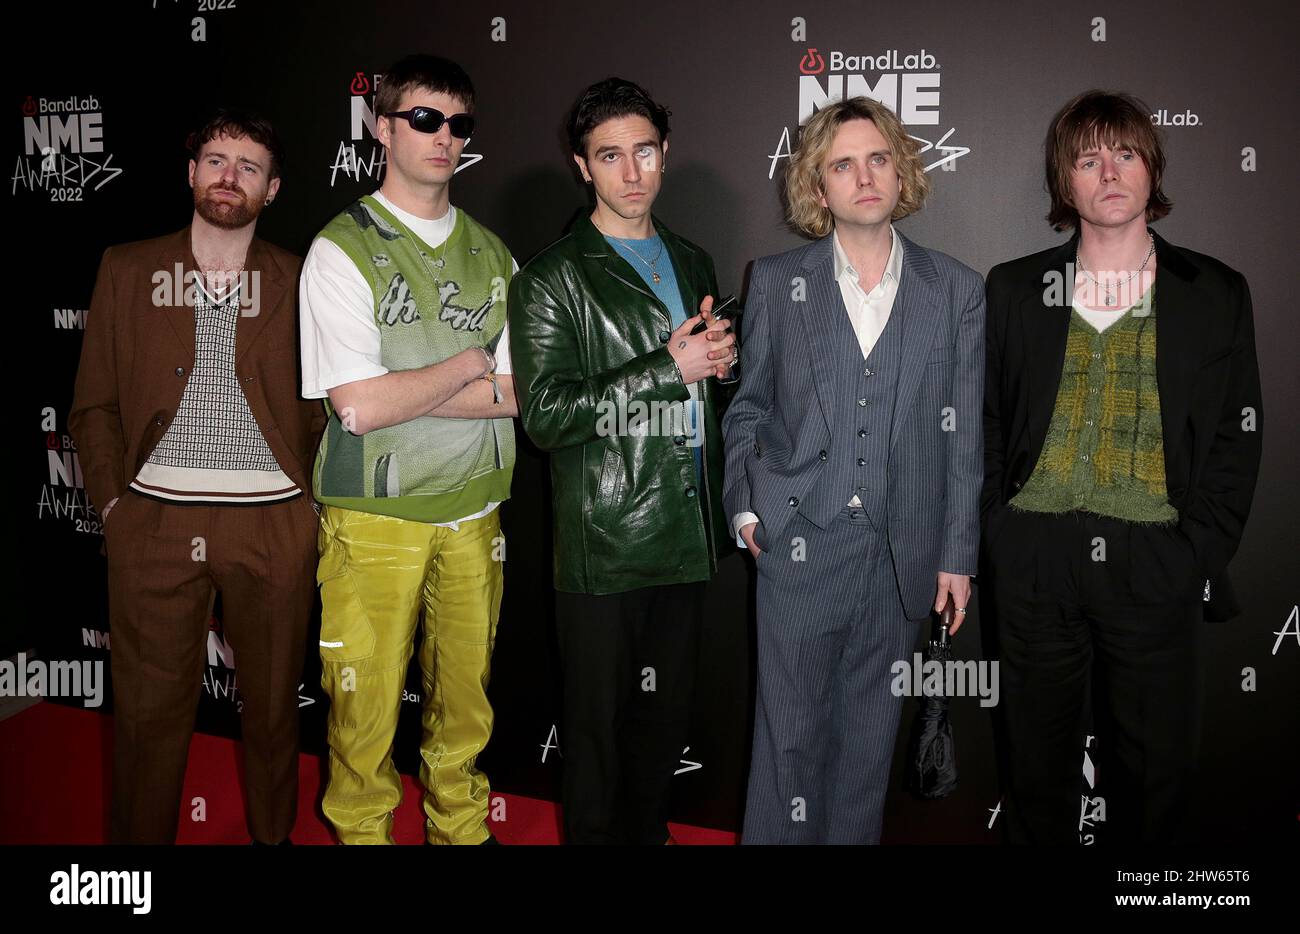 Mar 02, 2022 - London, England, UK - Carlos O'Connell, Tom Coll, Conor Curley, Conor Deegan III and Grian Chatten for Fontaines D.C attends The NME Aw Stock Photo